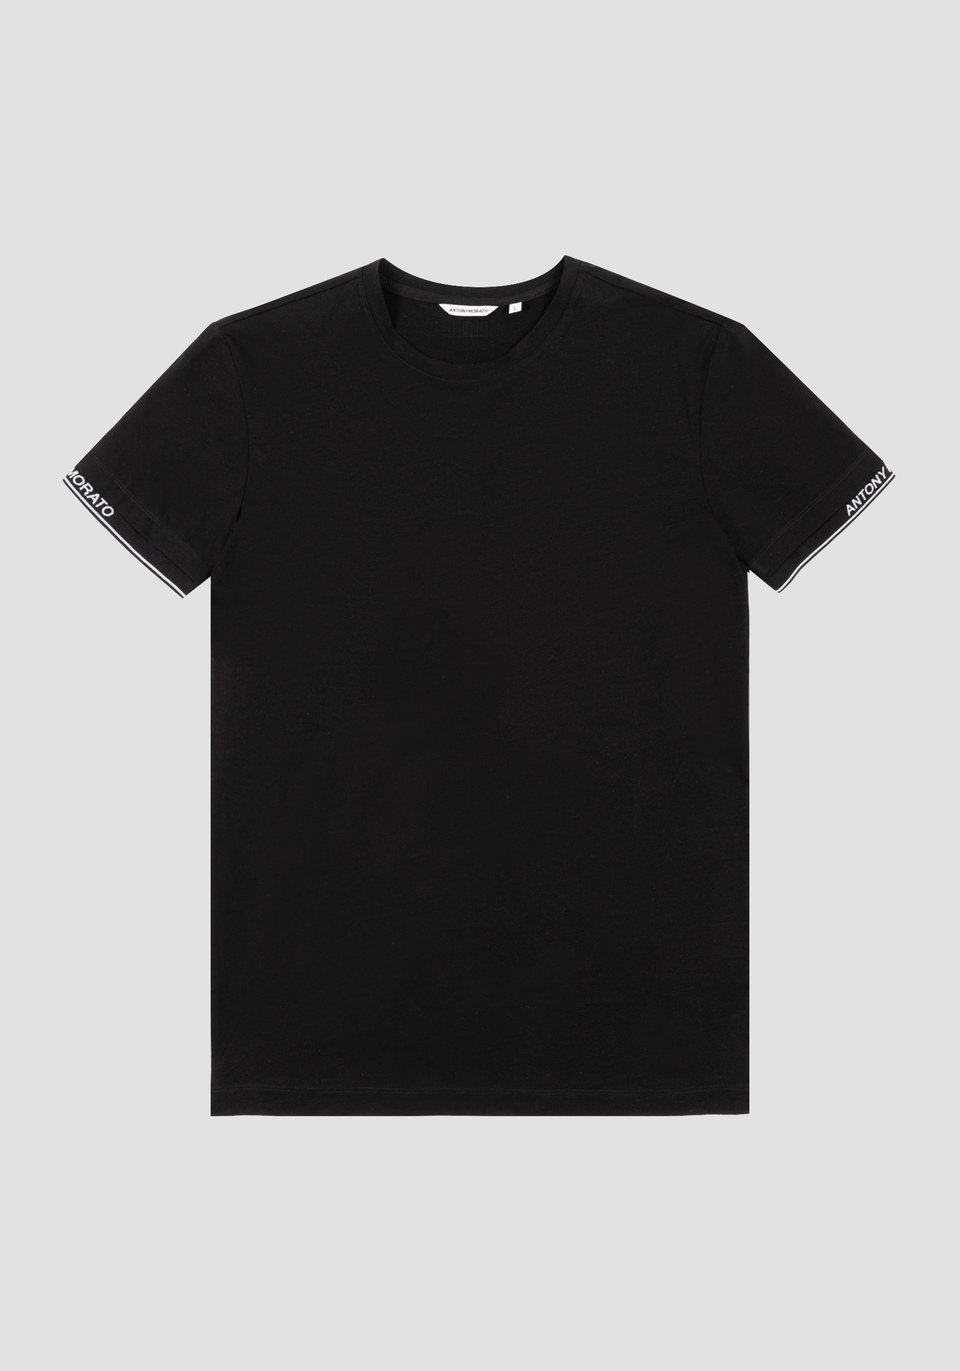 SLIM-FIT T-SHIRT MADE FROM SOFT COTTON WITH A LOGO DETAIL ON SLEEVE END - Antony Morato Online Shop